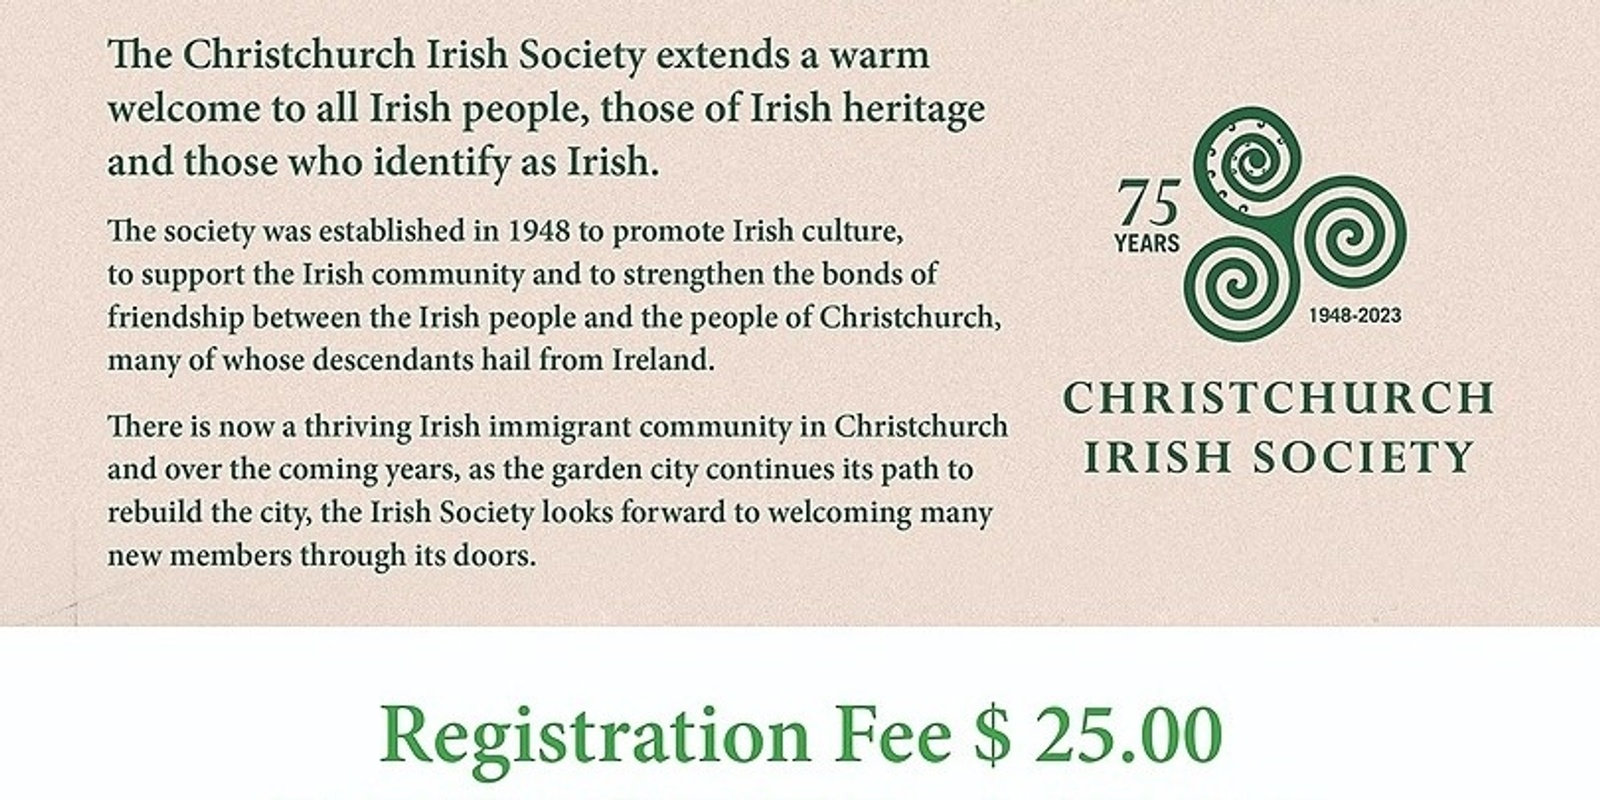 Registration Fee for the 75th Anniversary Weekend